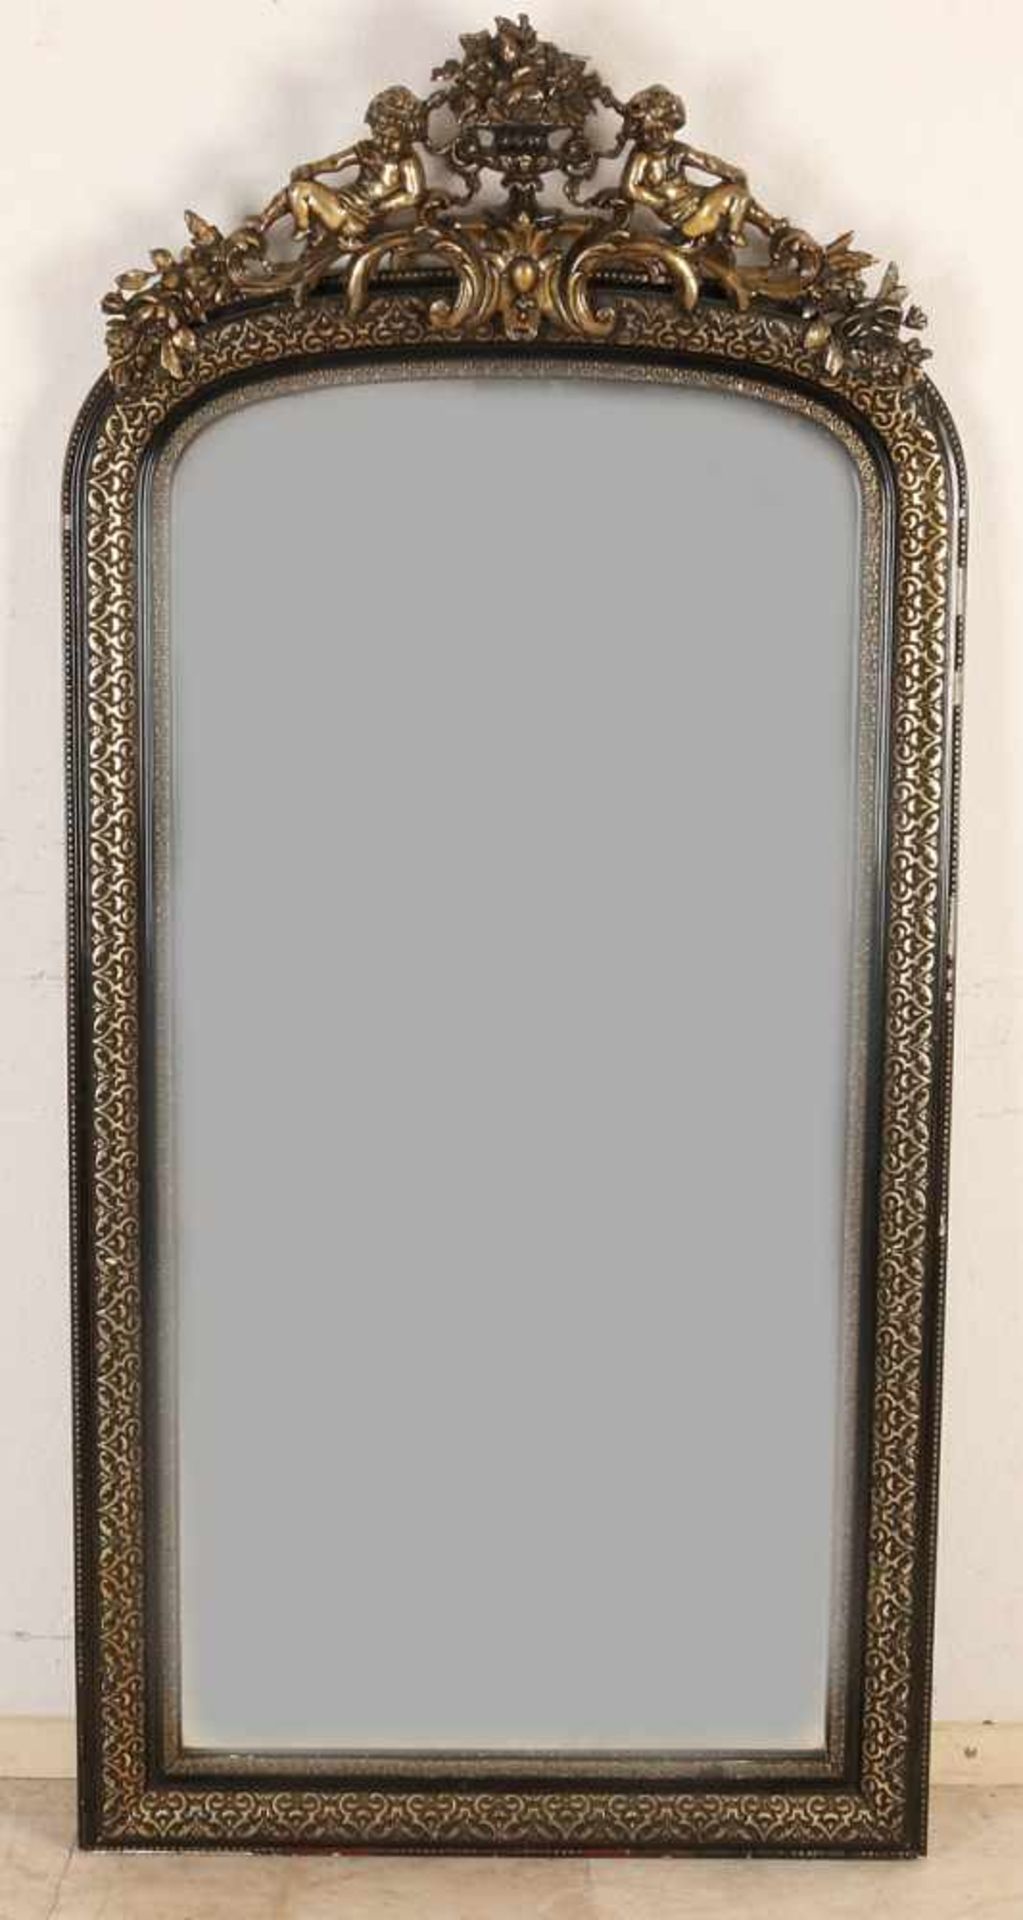 Large gold-plated 19th century Louis Philippe mirror with putti and faceted mirror. Approximately